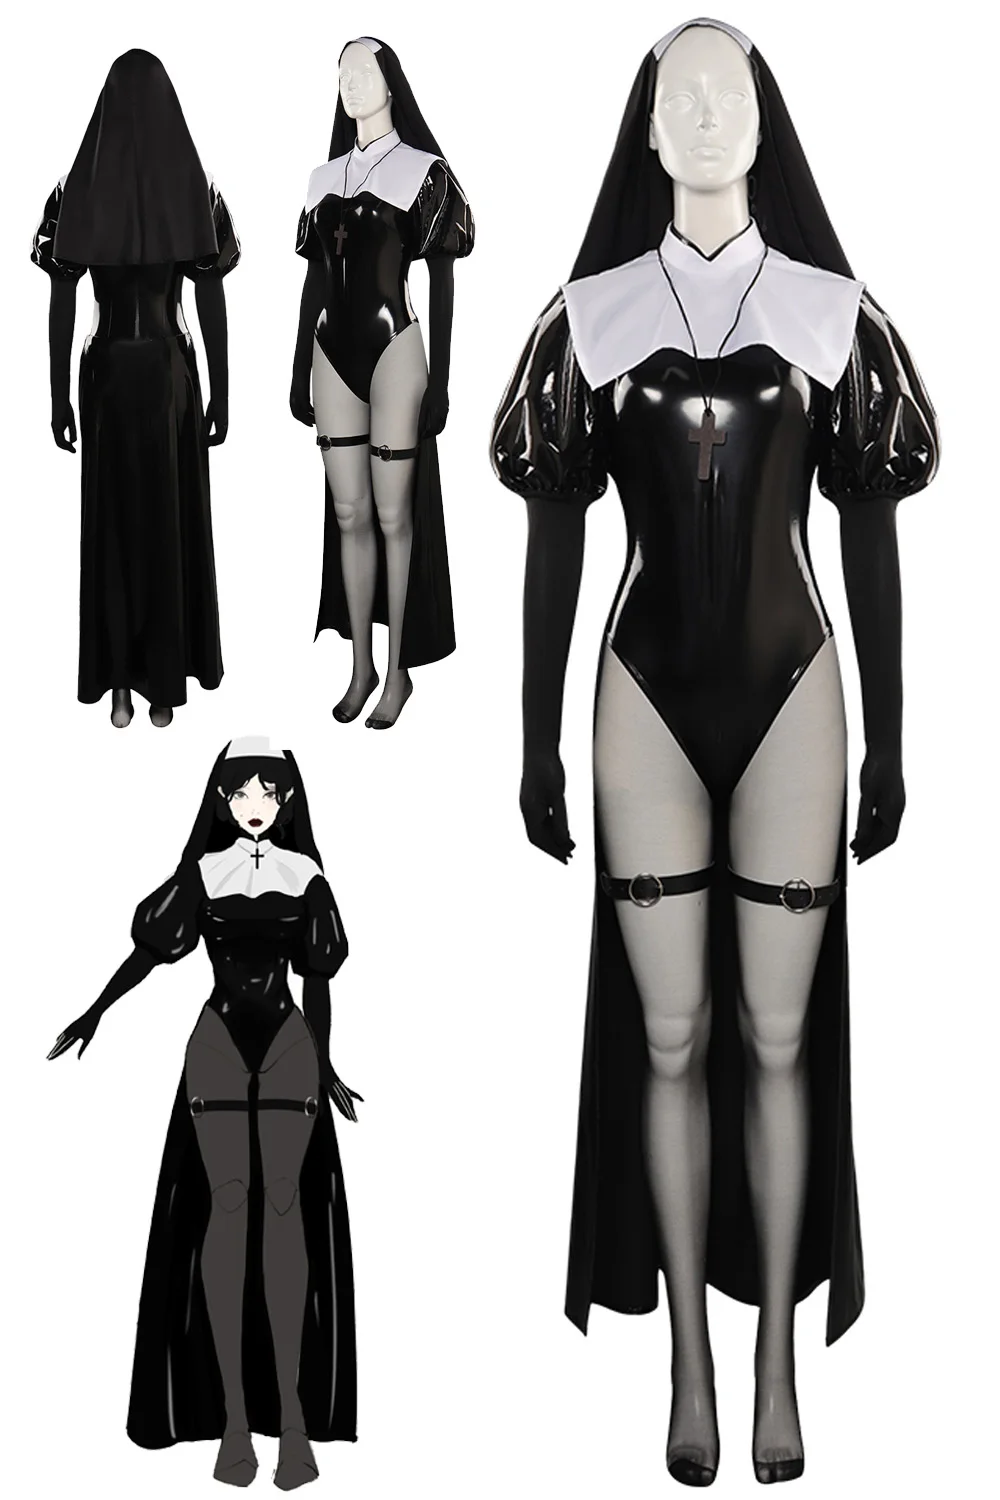 

Women Nut Cosplay Sexy Jumpsuit Fantasy 2023 Movie The Nun 2 Costume Disguise Adult Girls Halloween Party Fantasia Outfits